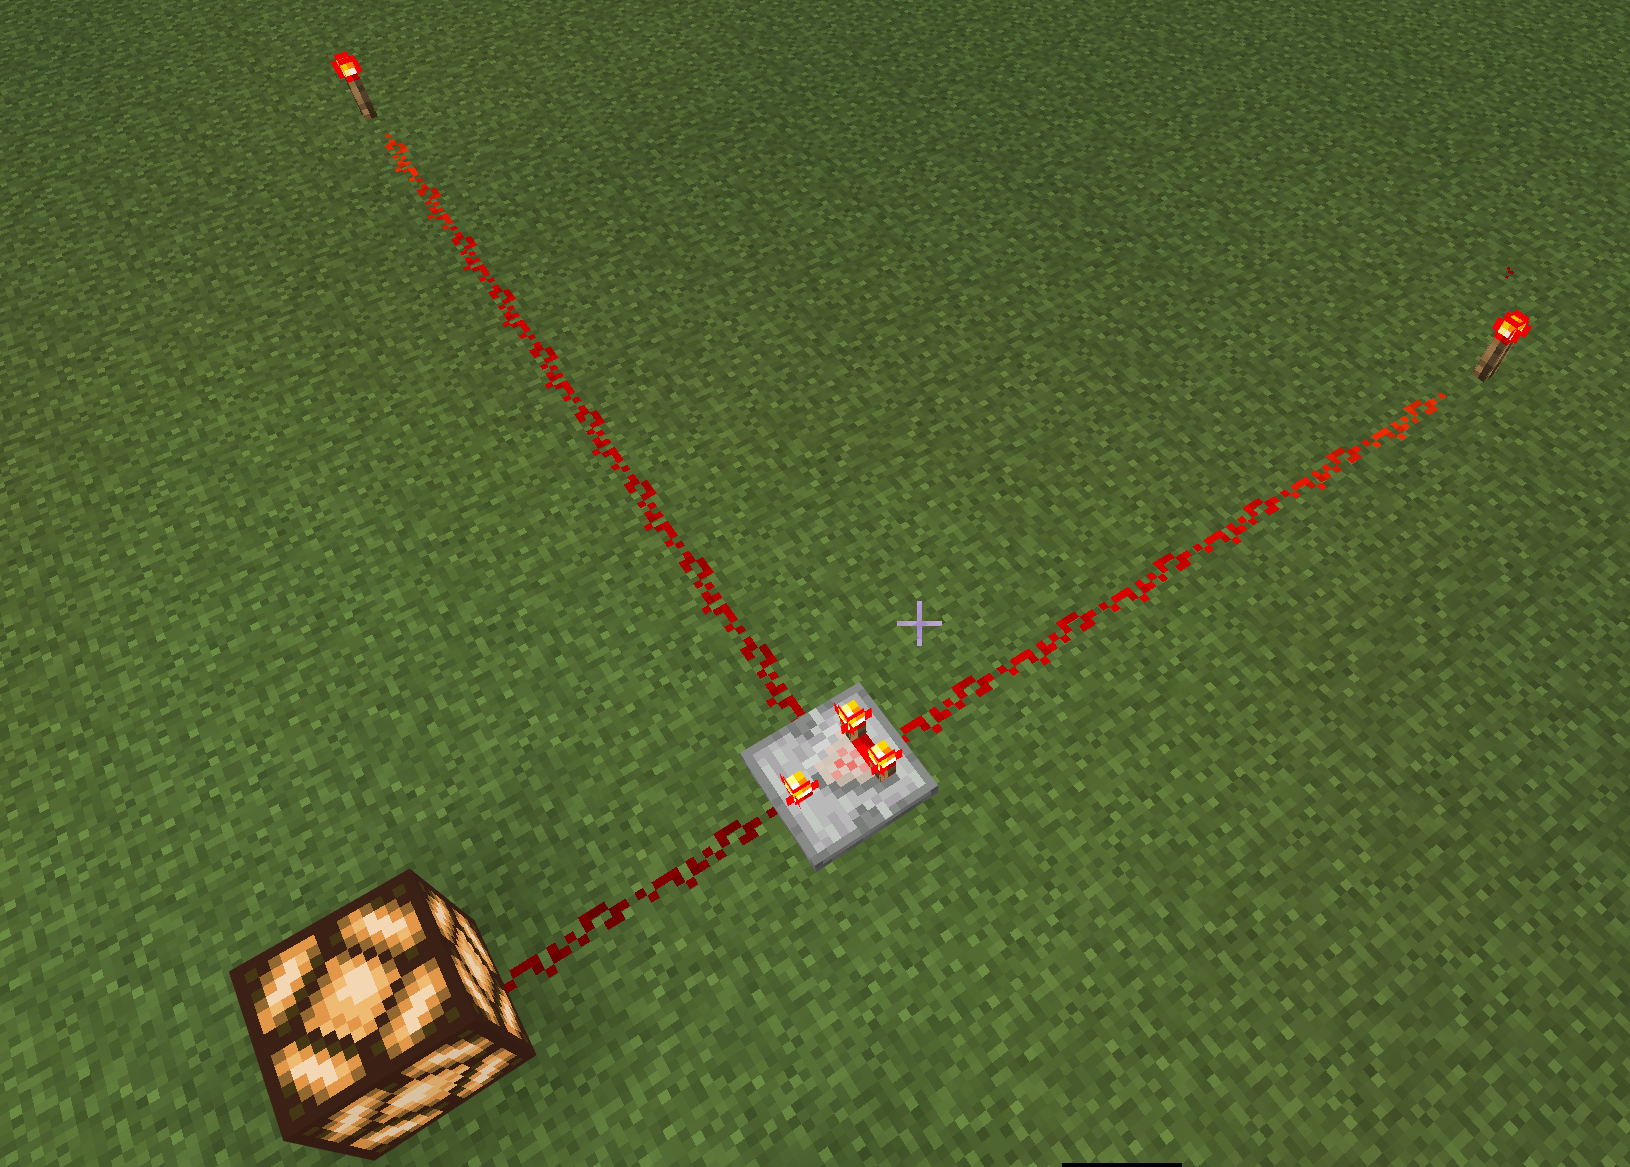 Image of a comparator comparing 2 redstone signals.